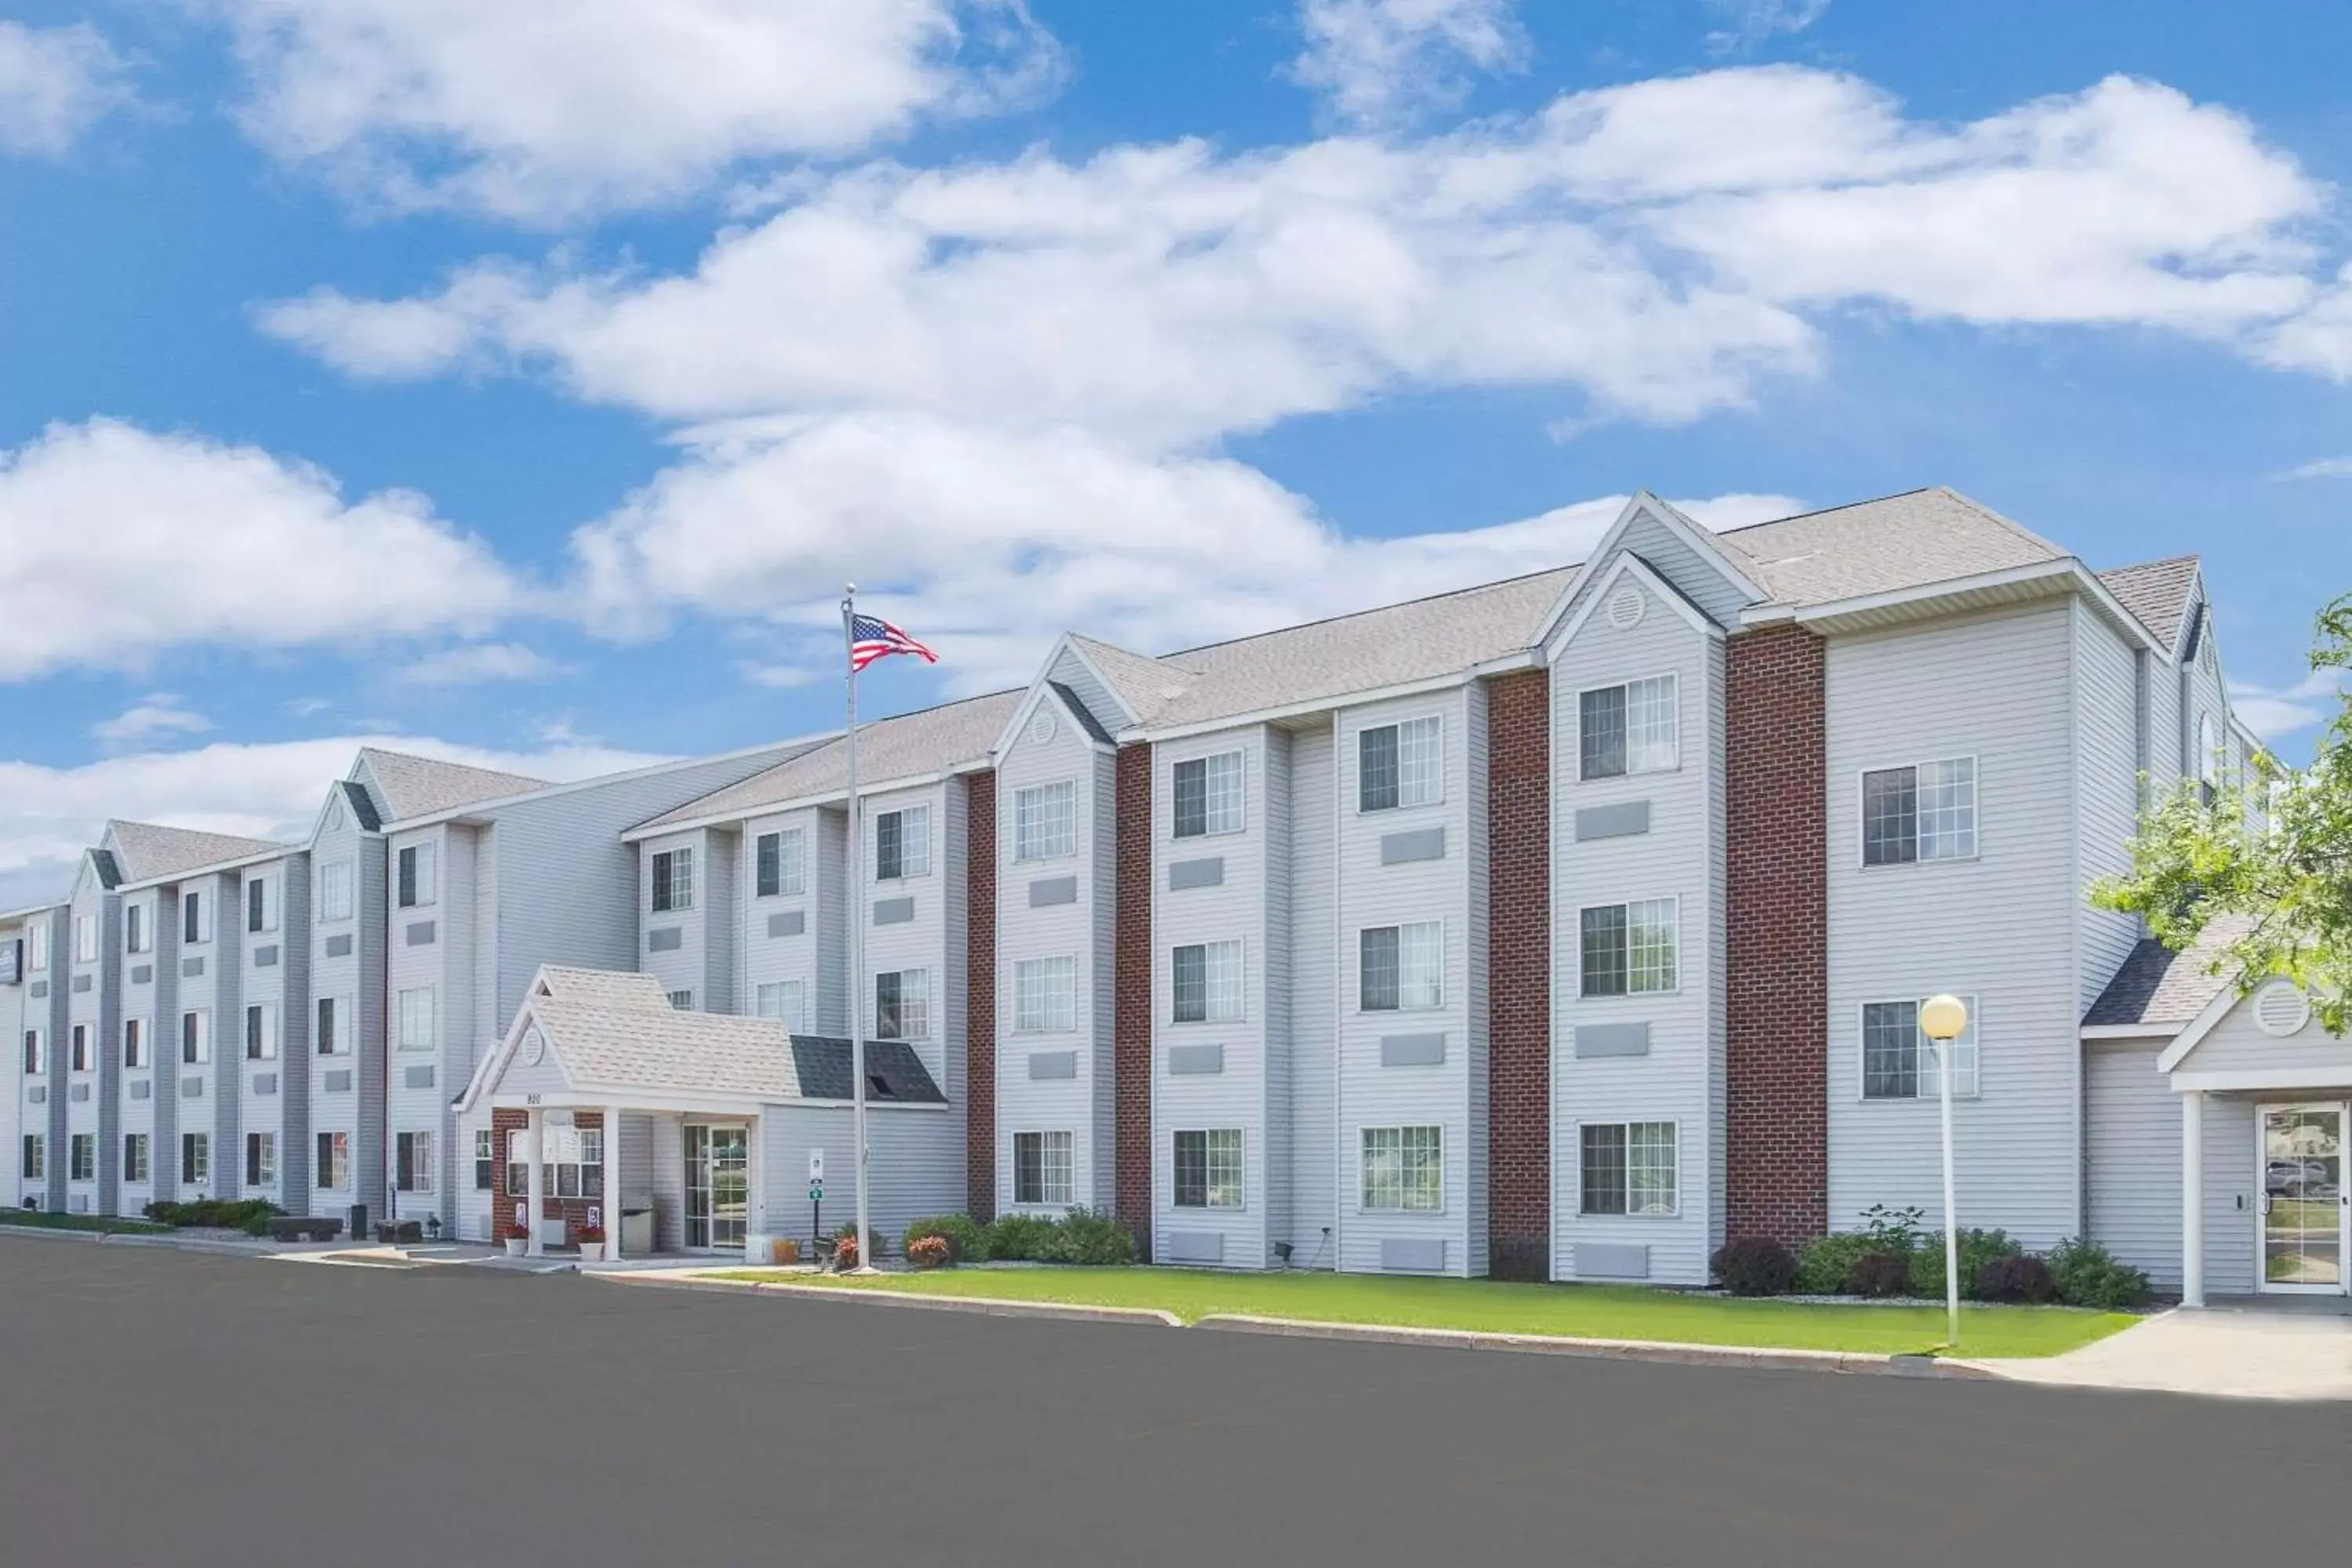 Property building in Microtel Inn & Suites by Wyndham Fond Du Lac